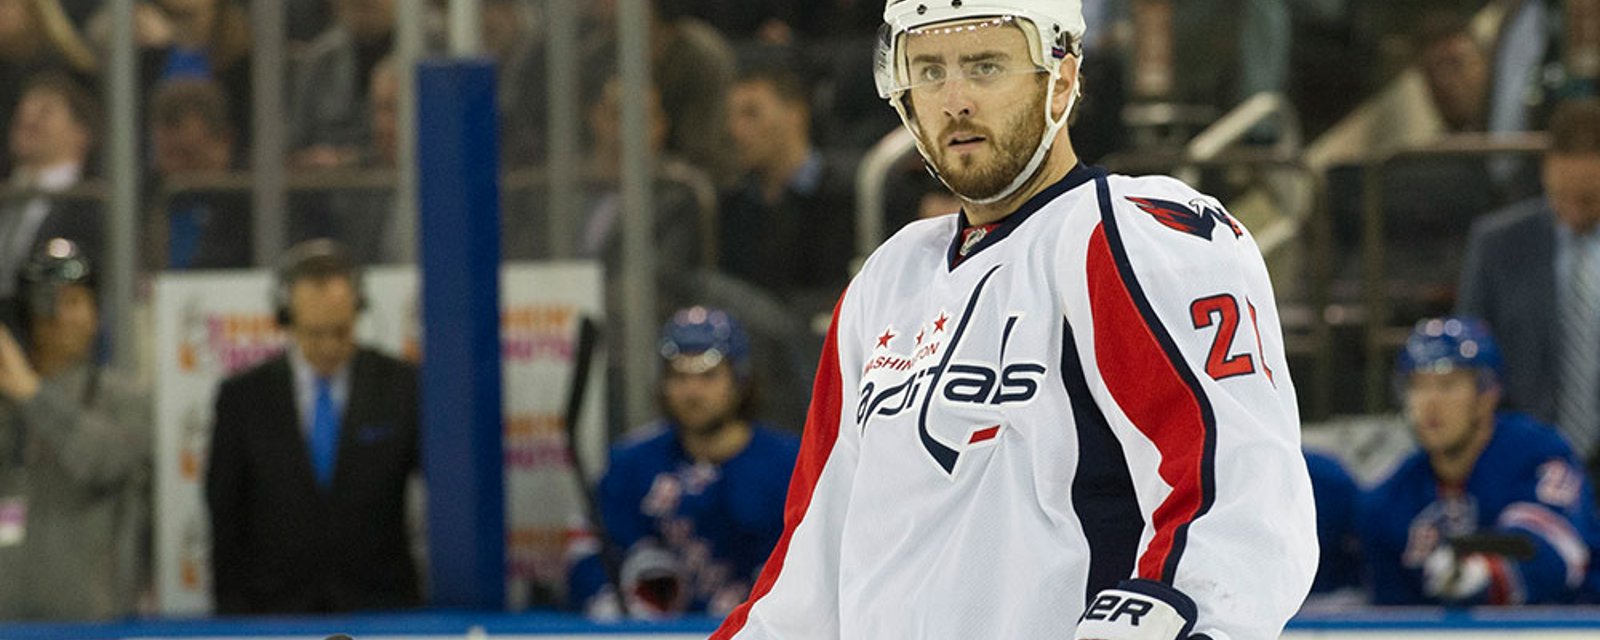 Rangers’ Shattenkirk takes a shot at his former team